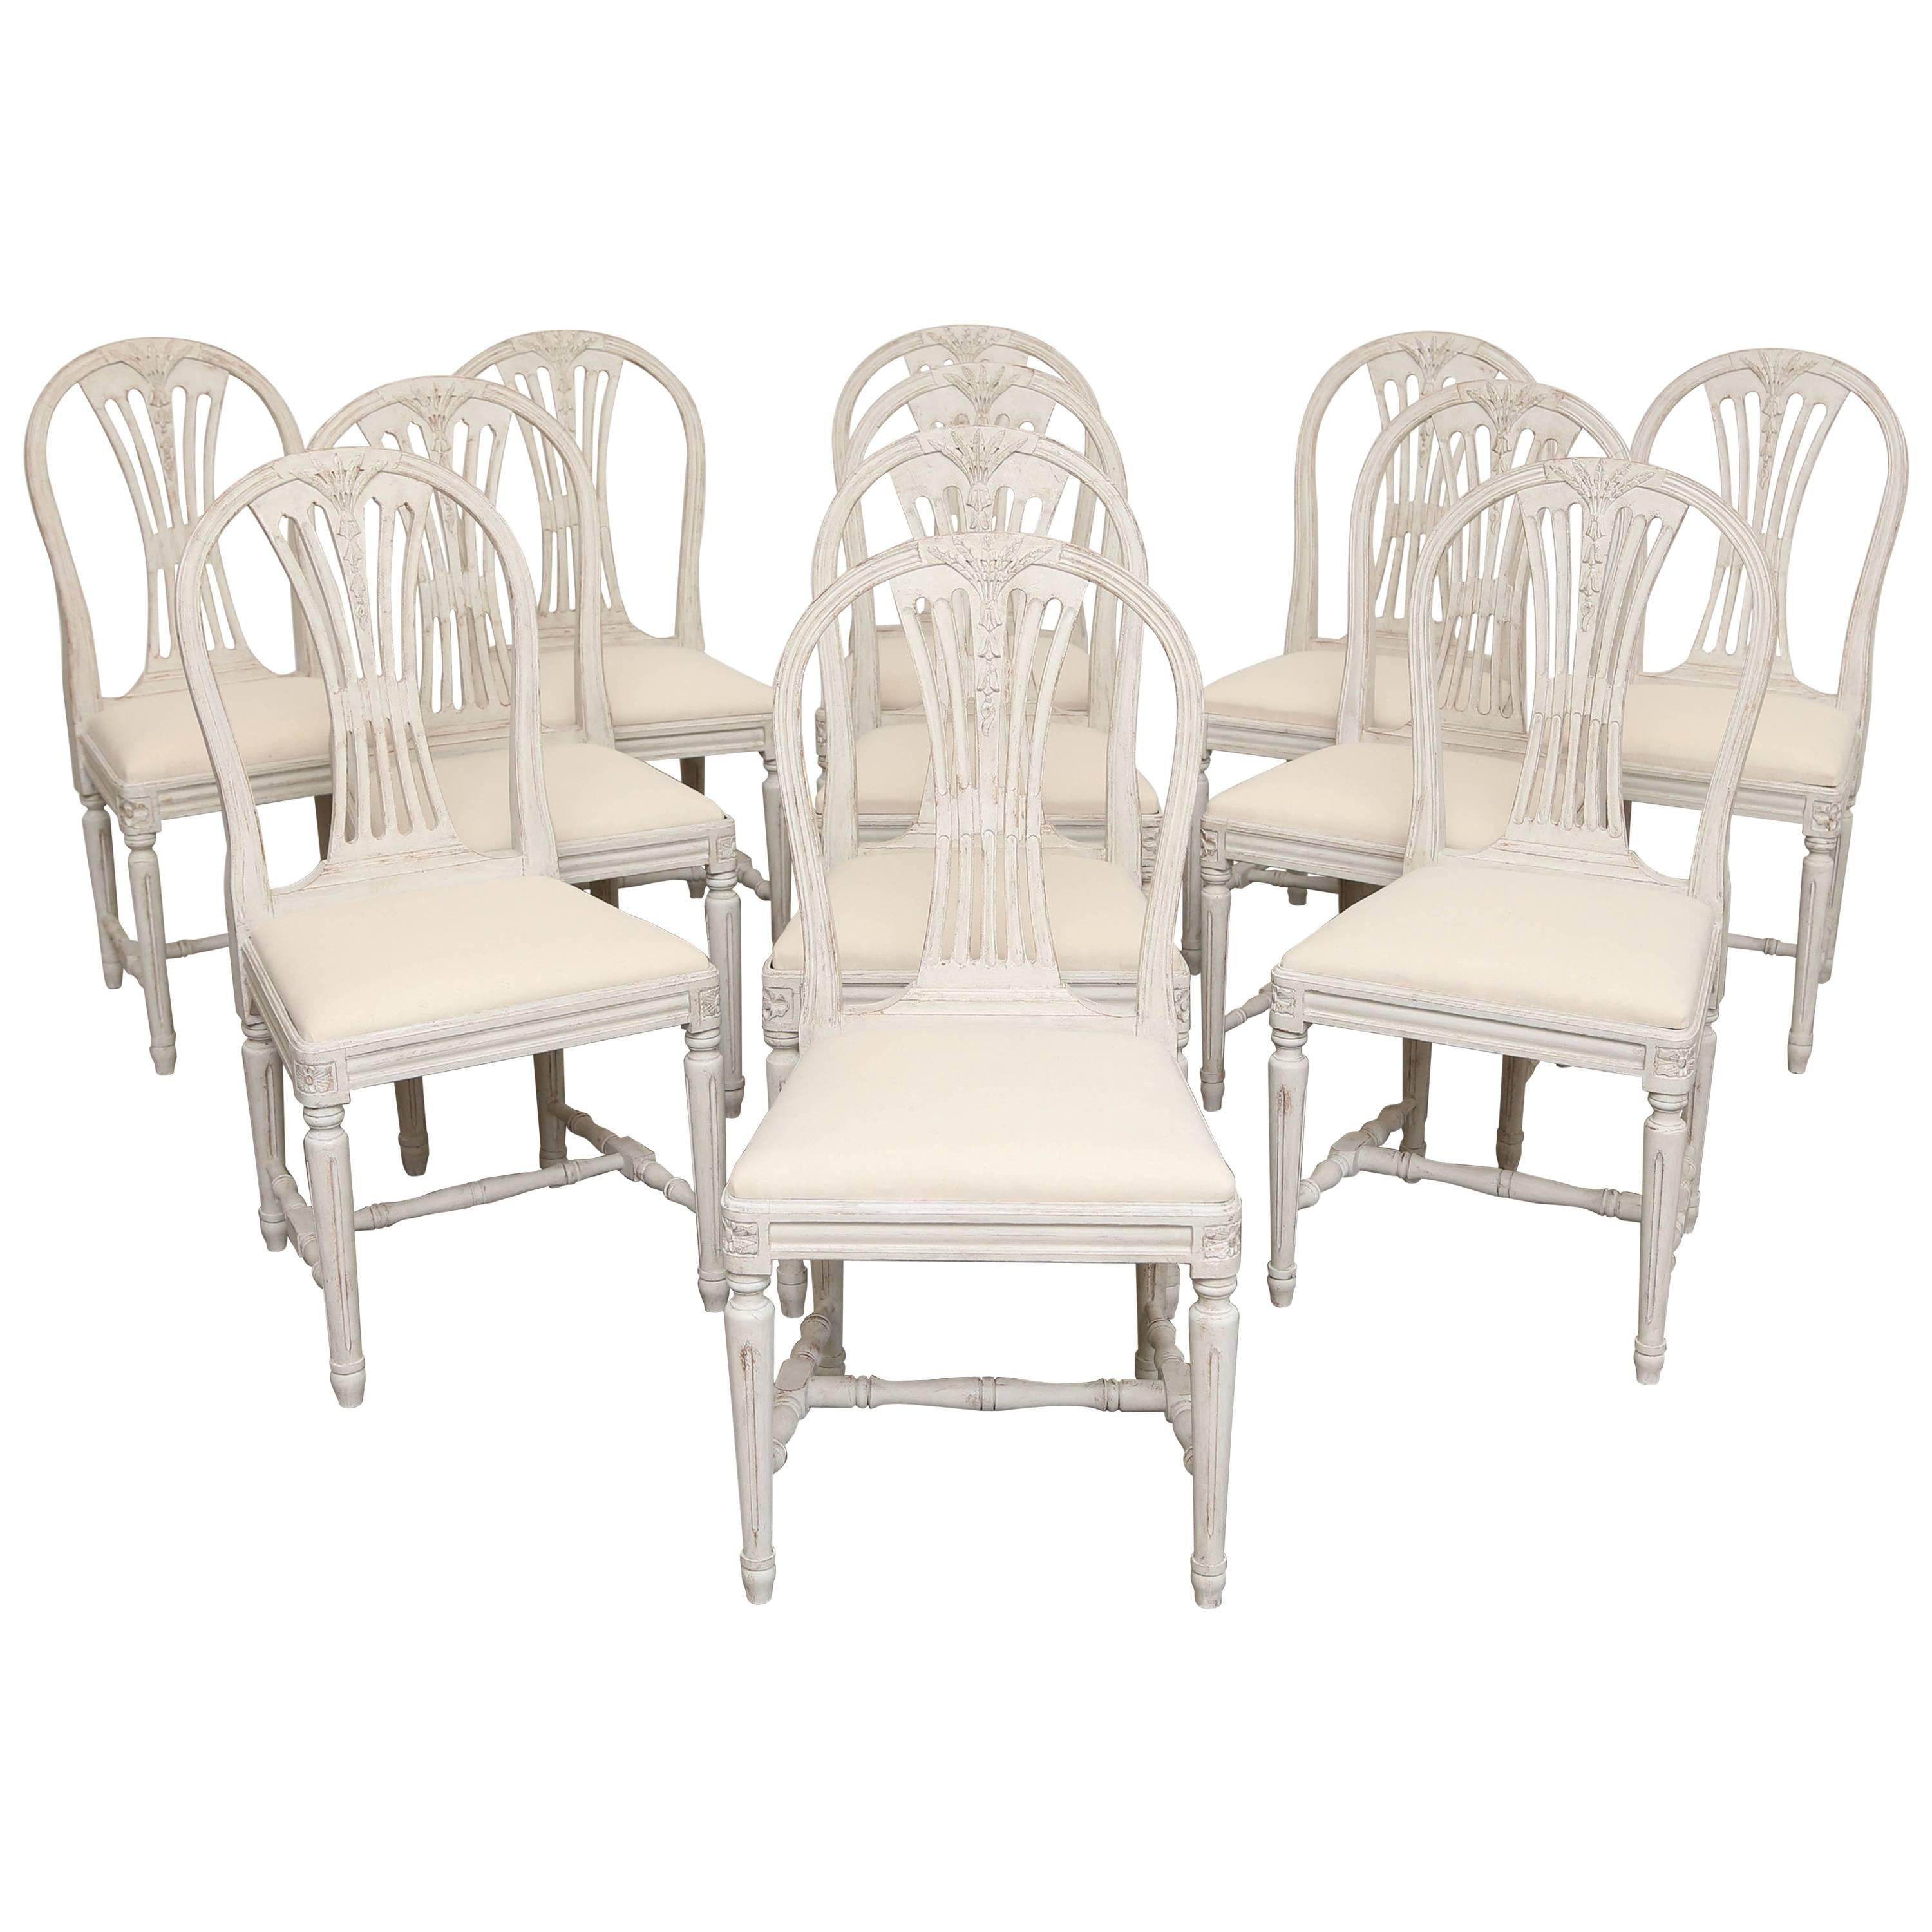 Set of 12 Painted Gustavian Style Dining Chairs Early 20th Century